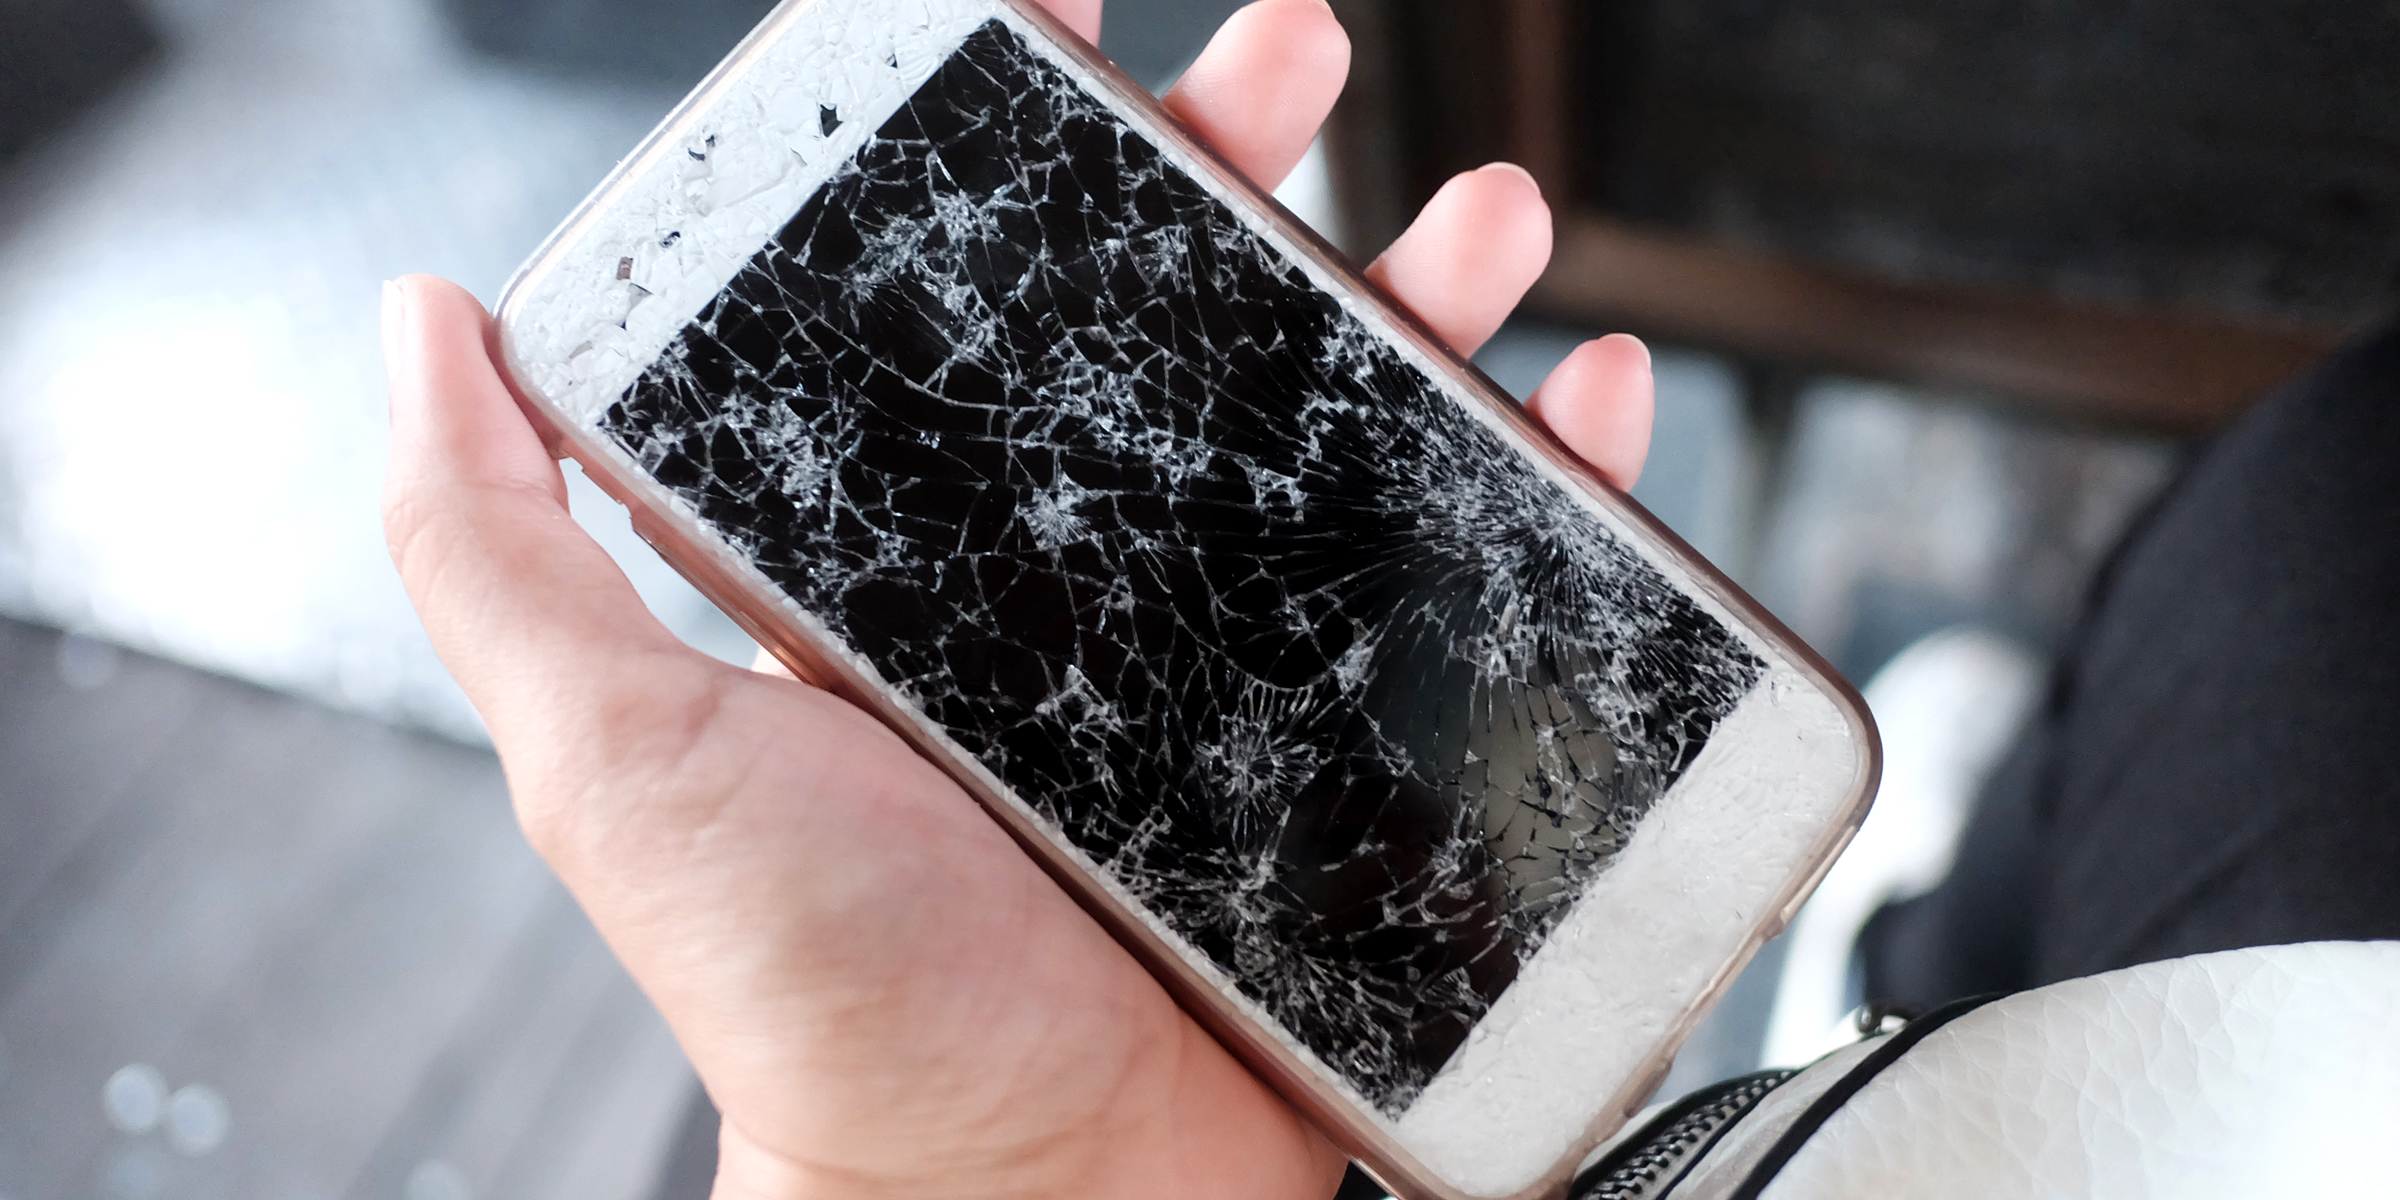 A phone with a cracked screen | Source: Shutterstock